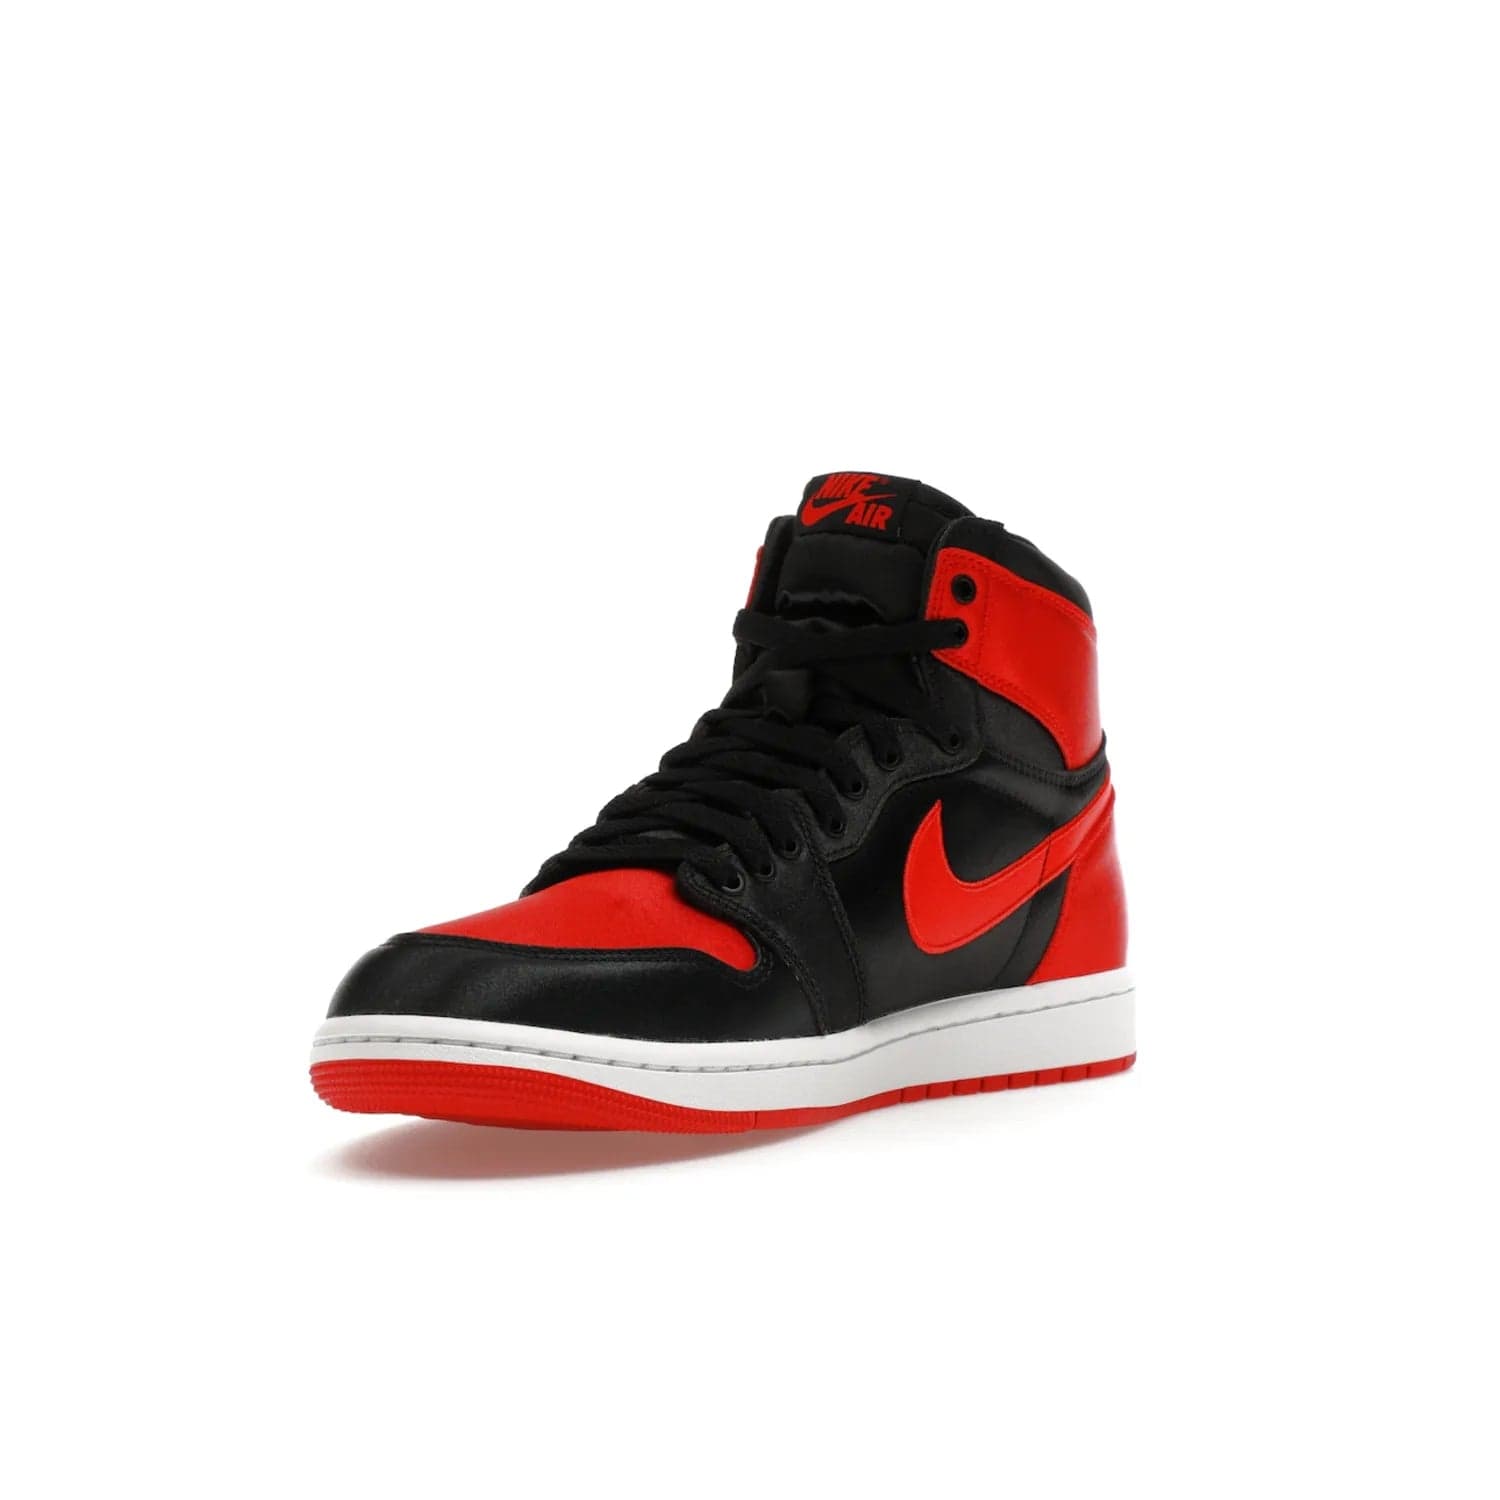 Jordan 1 Retro High OG Satin Bred (Women's) - Image 14 - Only at www.BallersClubKickz.com - Introducing the Jordan 1 Retro High OG Satin Bred (Women's). Luxe satin finish, contrasting hues & classic accents. Trending sneakers symbolizing timelessness & heritage. Make a bold statement with this iconic shoe. Available October 4, 2023.